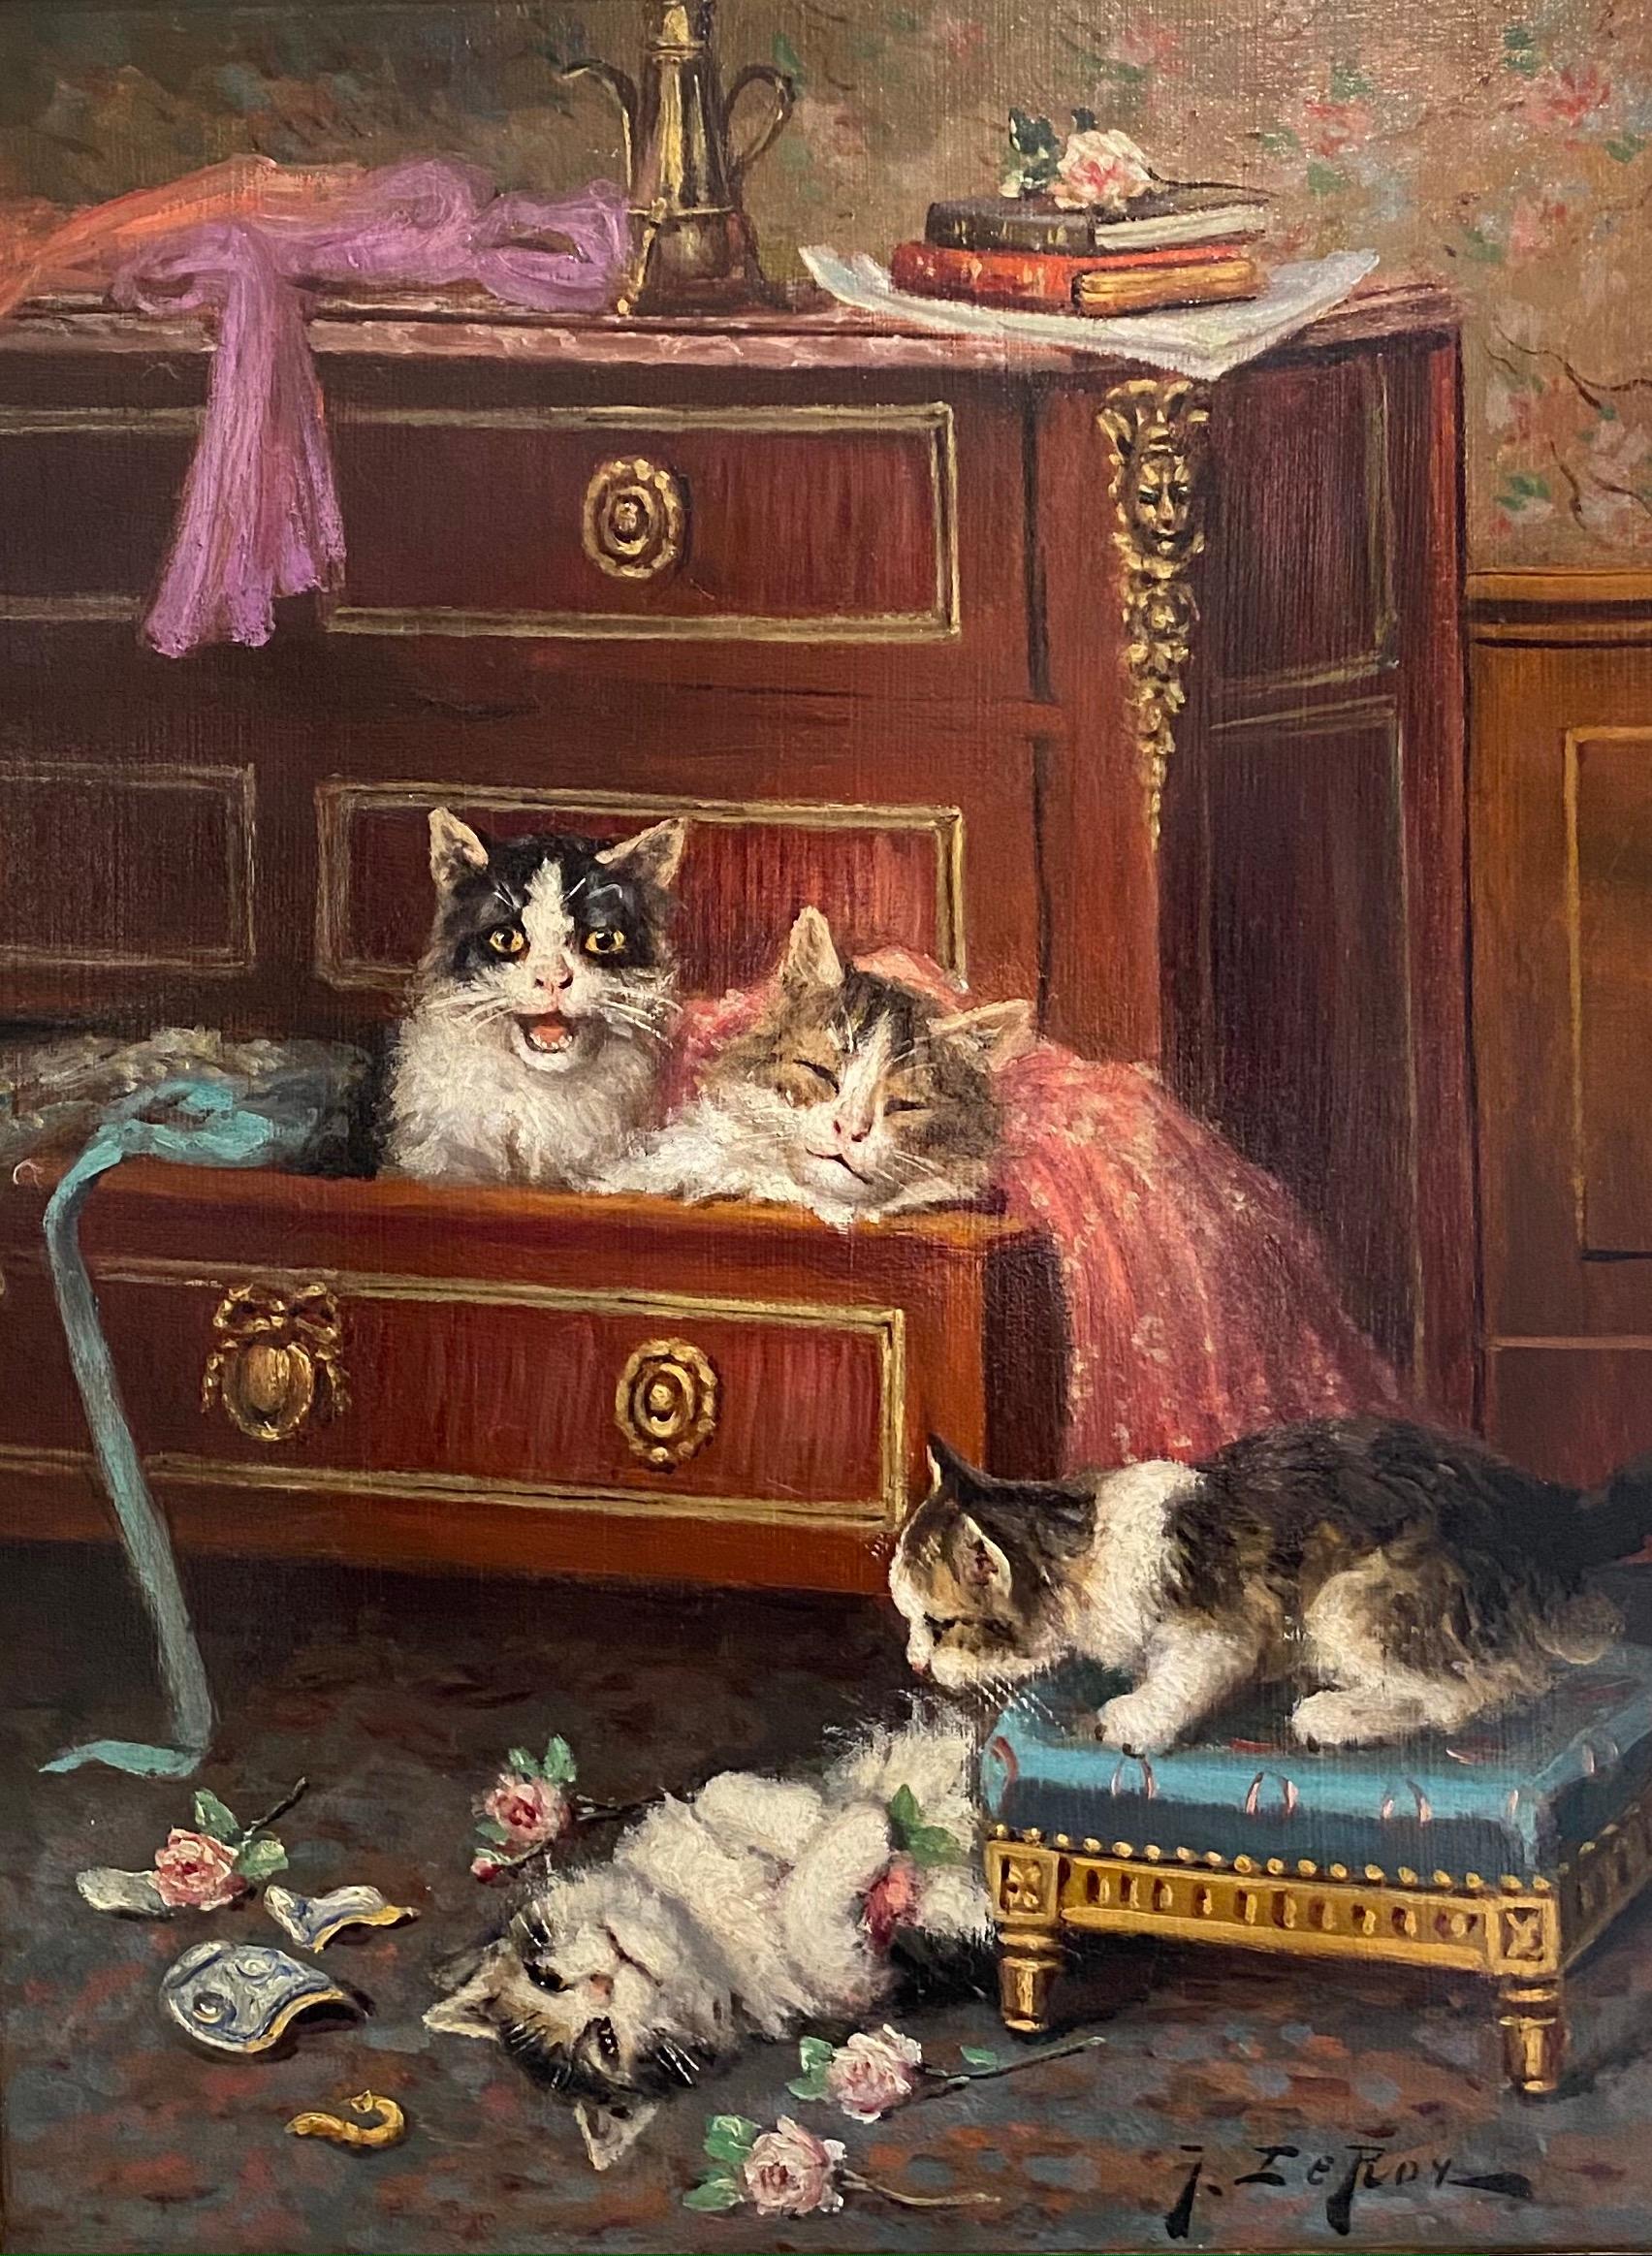 'Kittens' a charming oil on canvas by well known cat artist Jules Leroy. Showing 4 kittens playing in an interior setting, surrounded by clothing, scarfs and fine furniture. Beautifully detailed showing jewels and bursting with colour throughout the